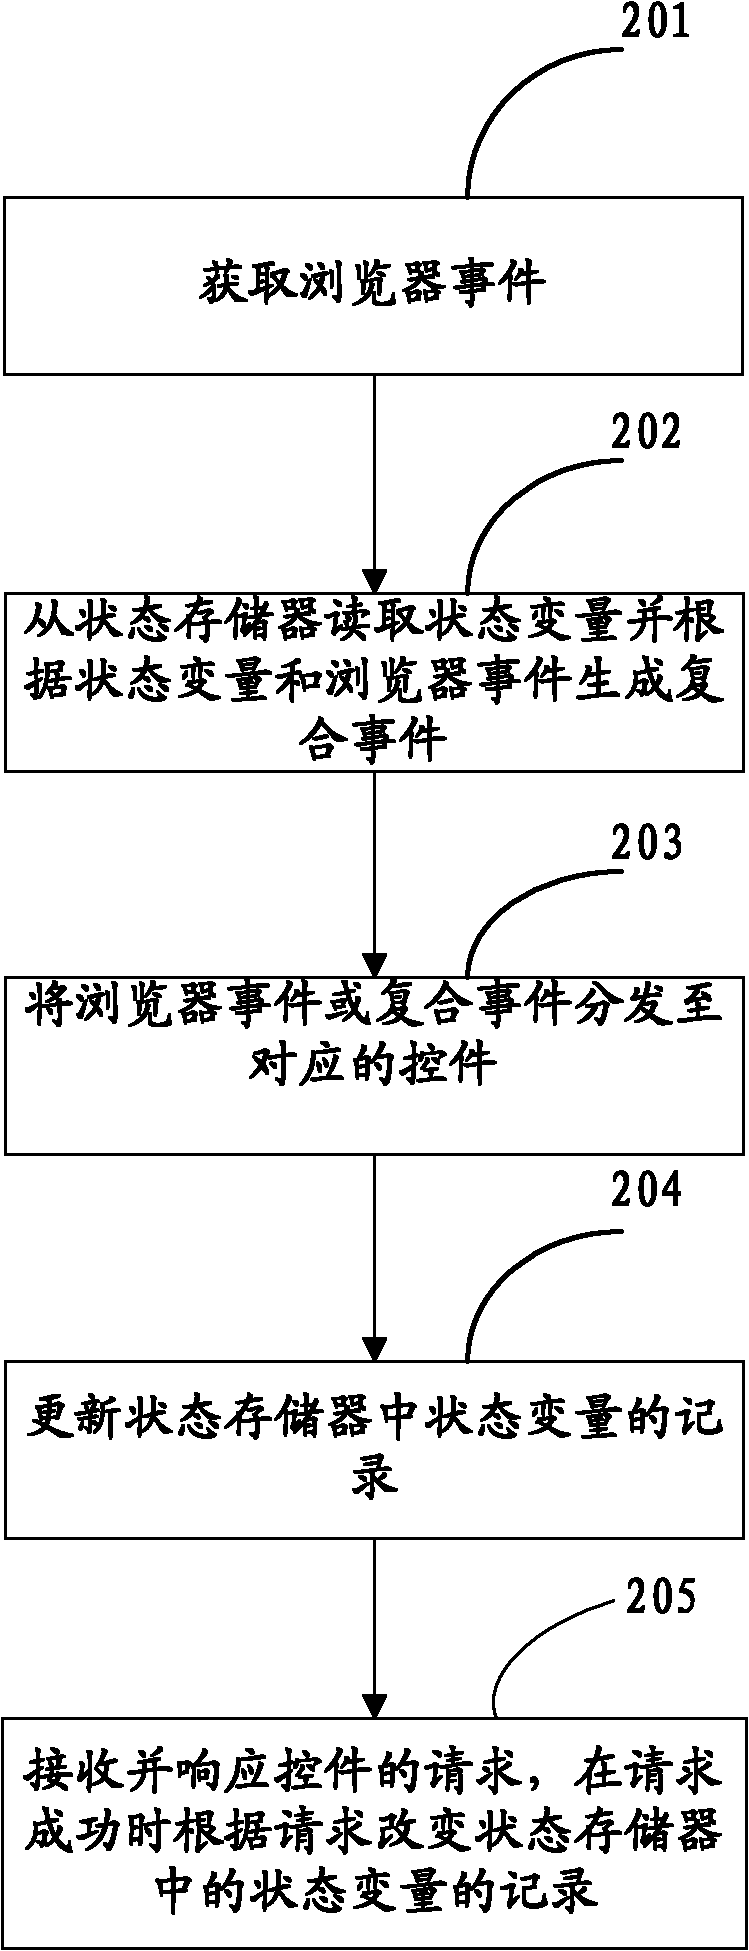 Device and method for intensively controlling WEB page event and state